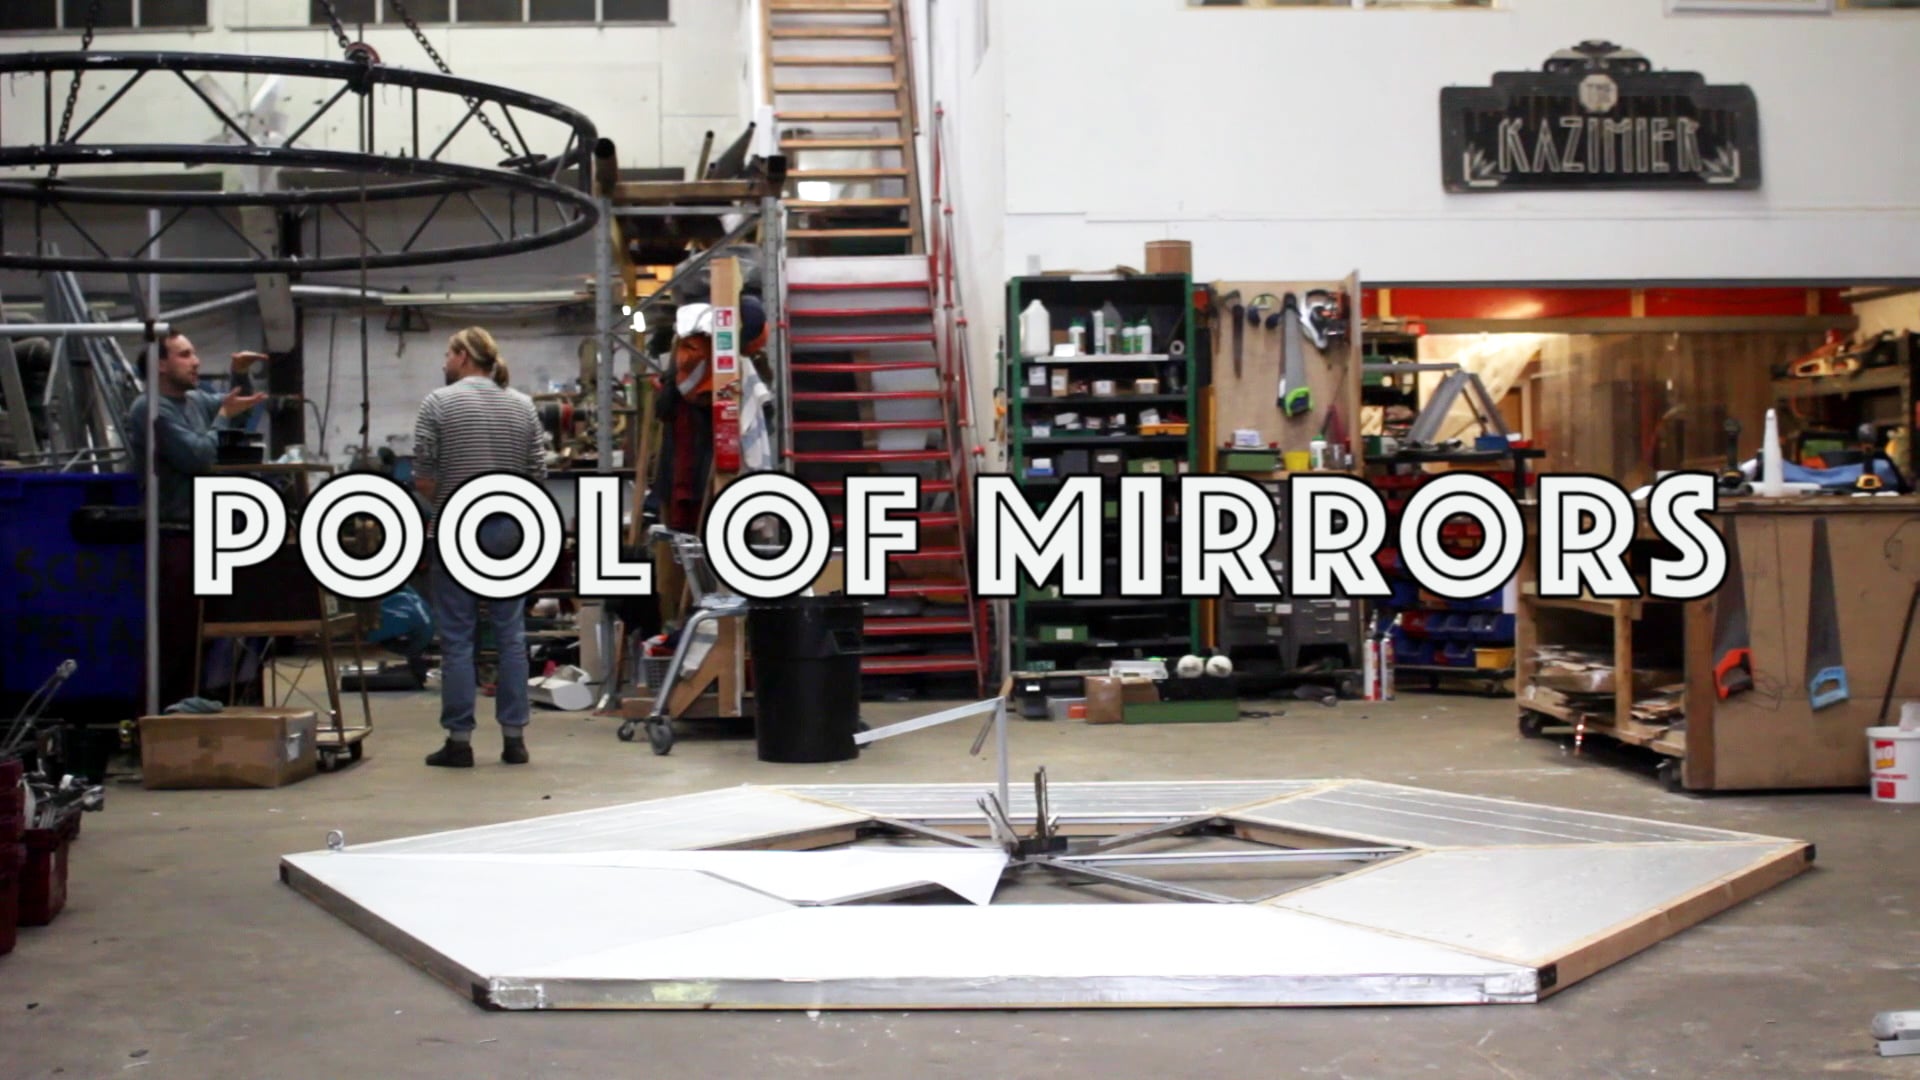 POOL OF MIRRORS